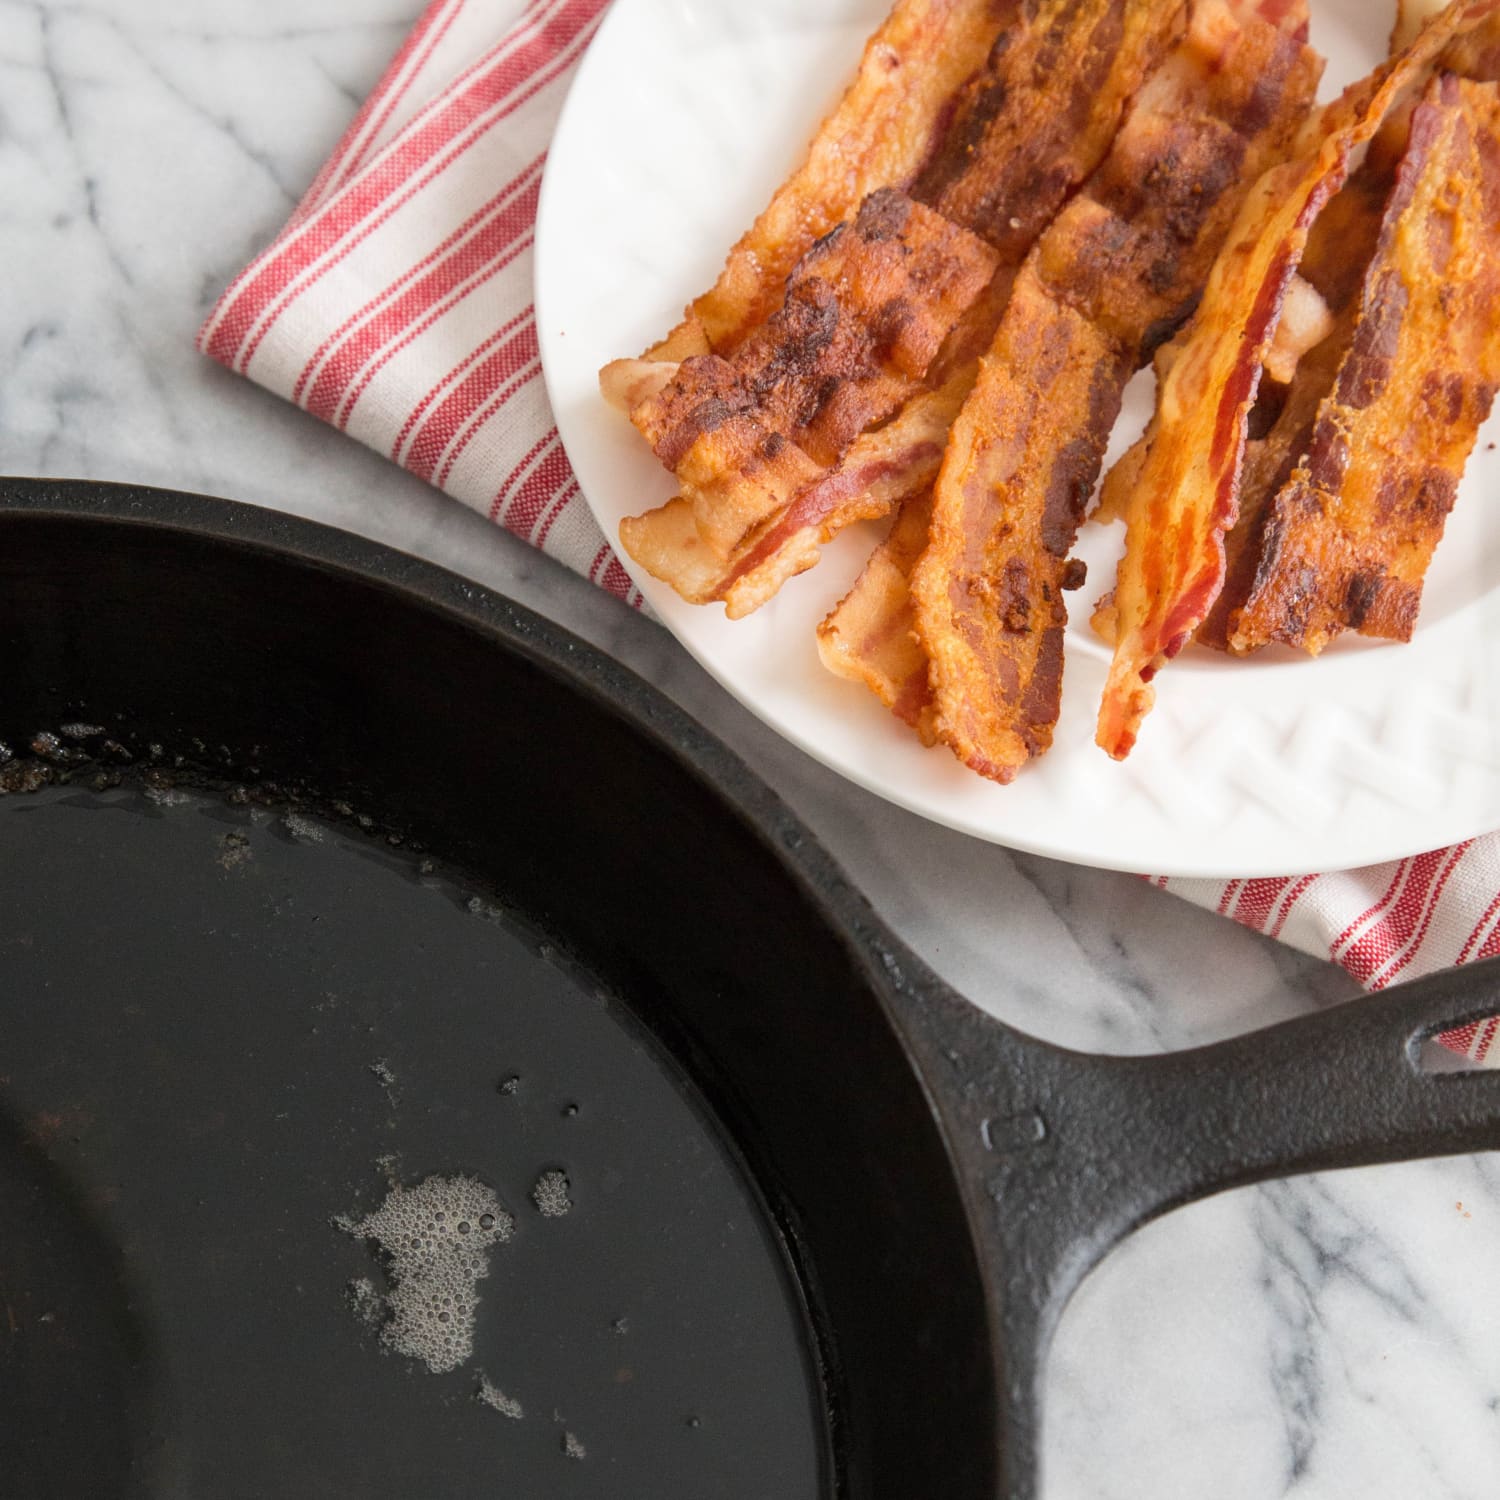 How to Clean Bacon Grease From Pans